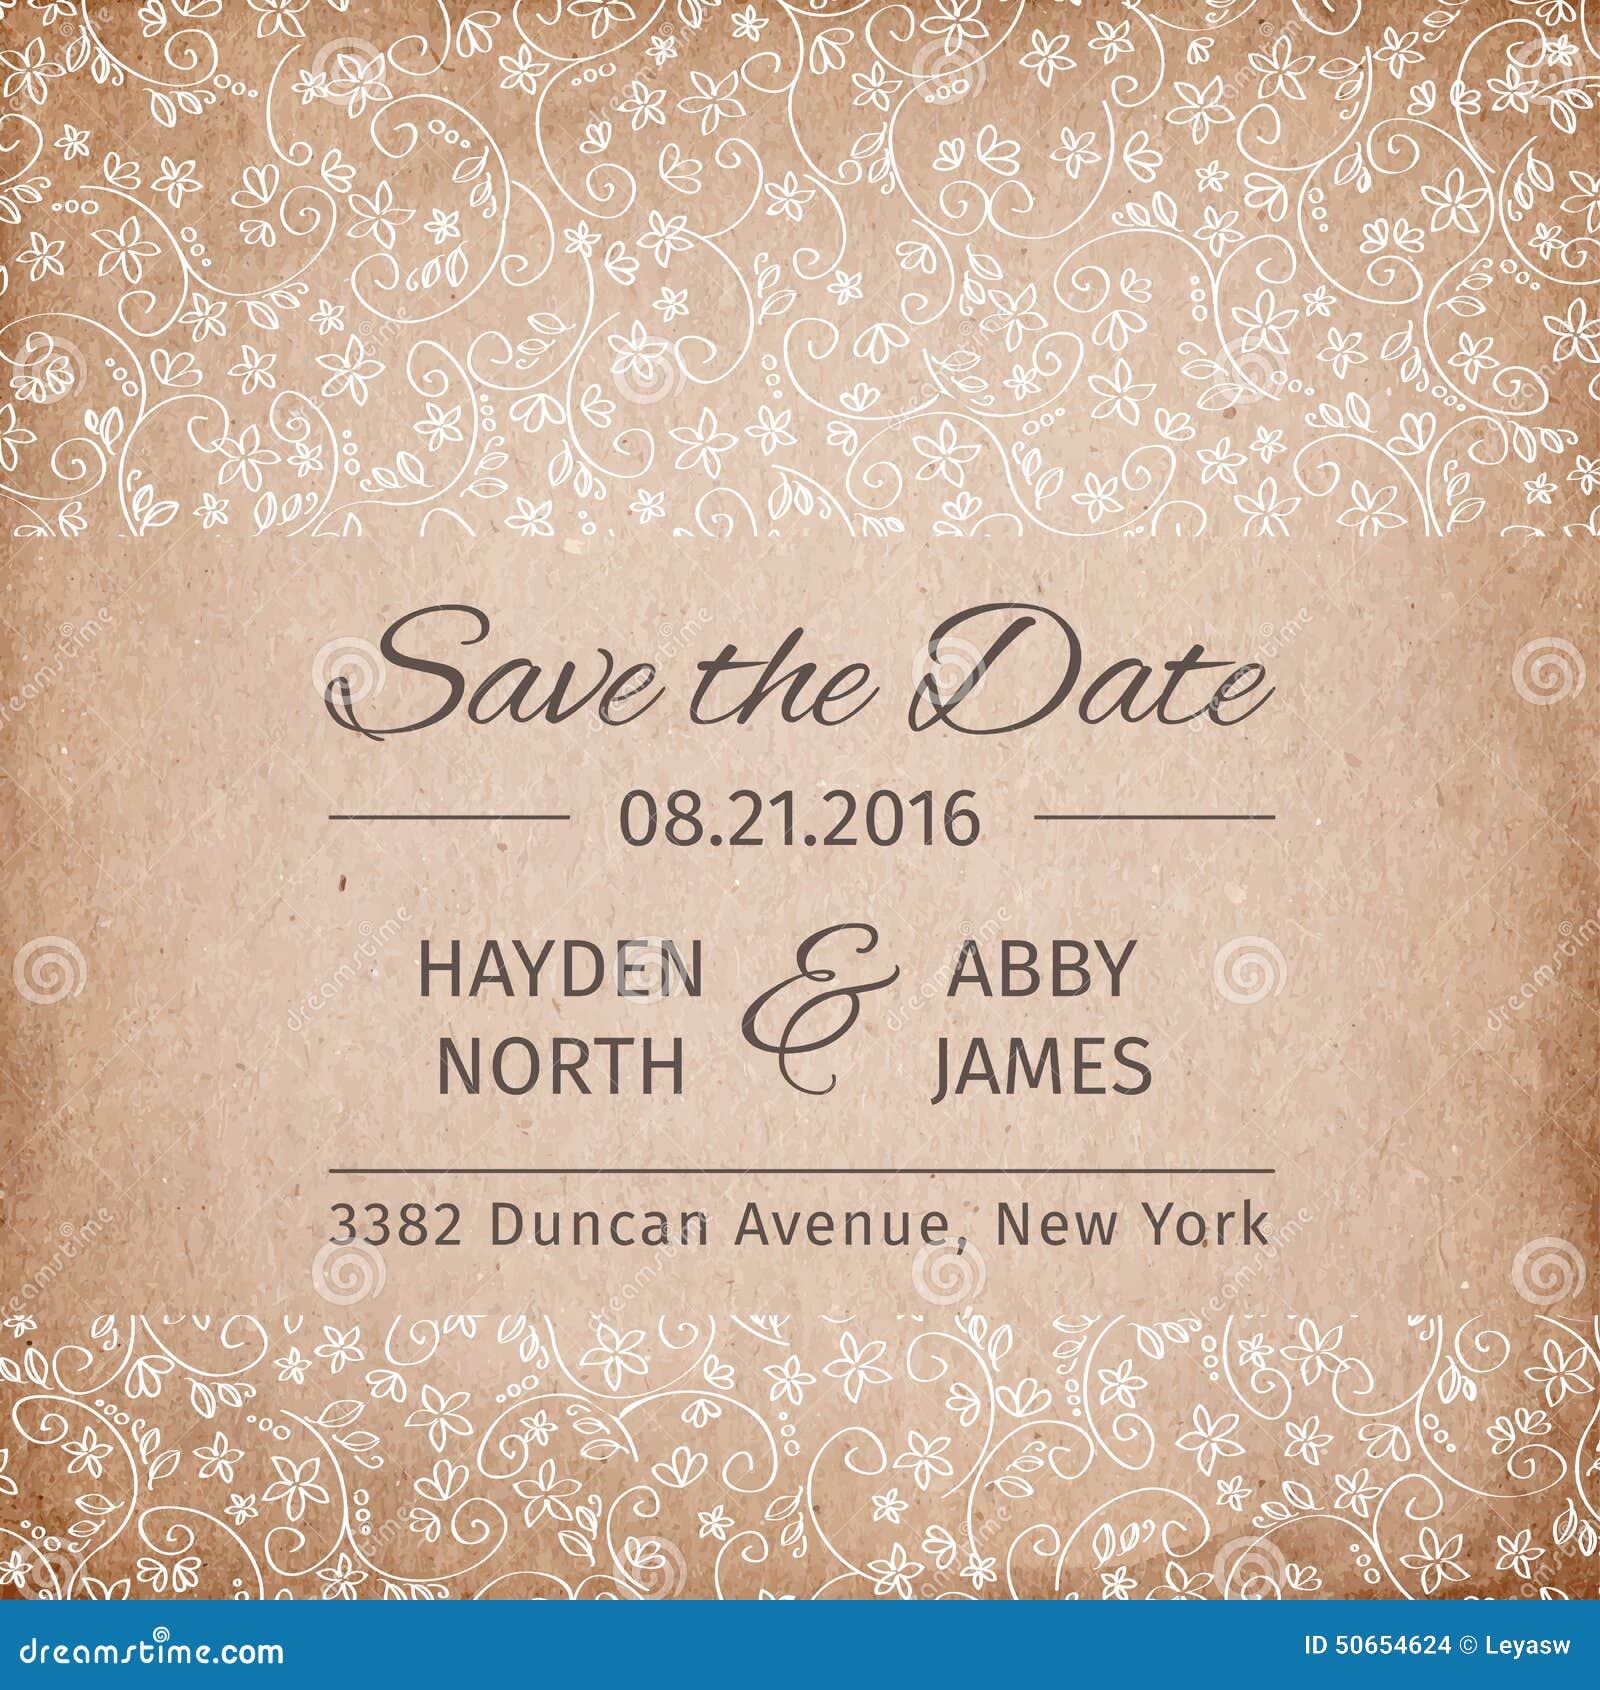 Wedding invitations without save the date